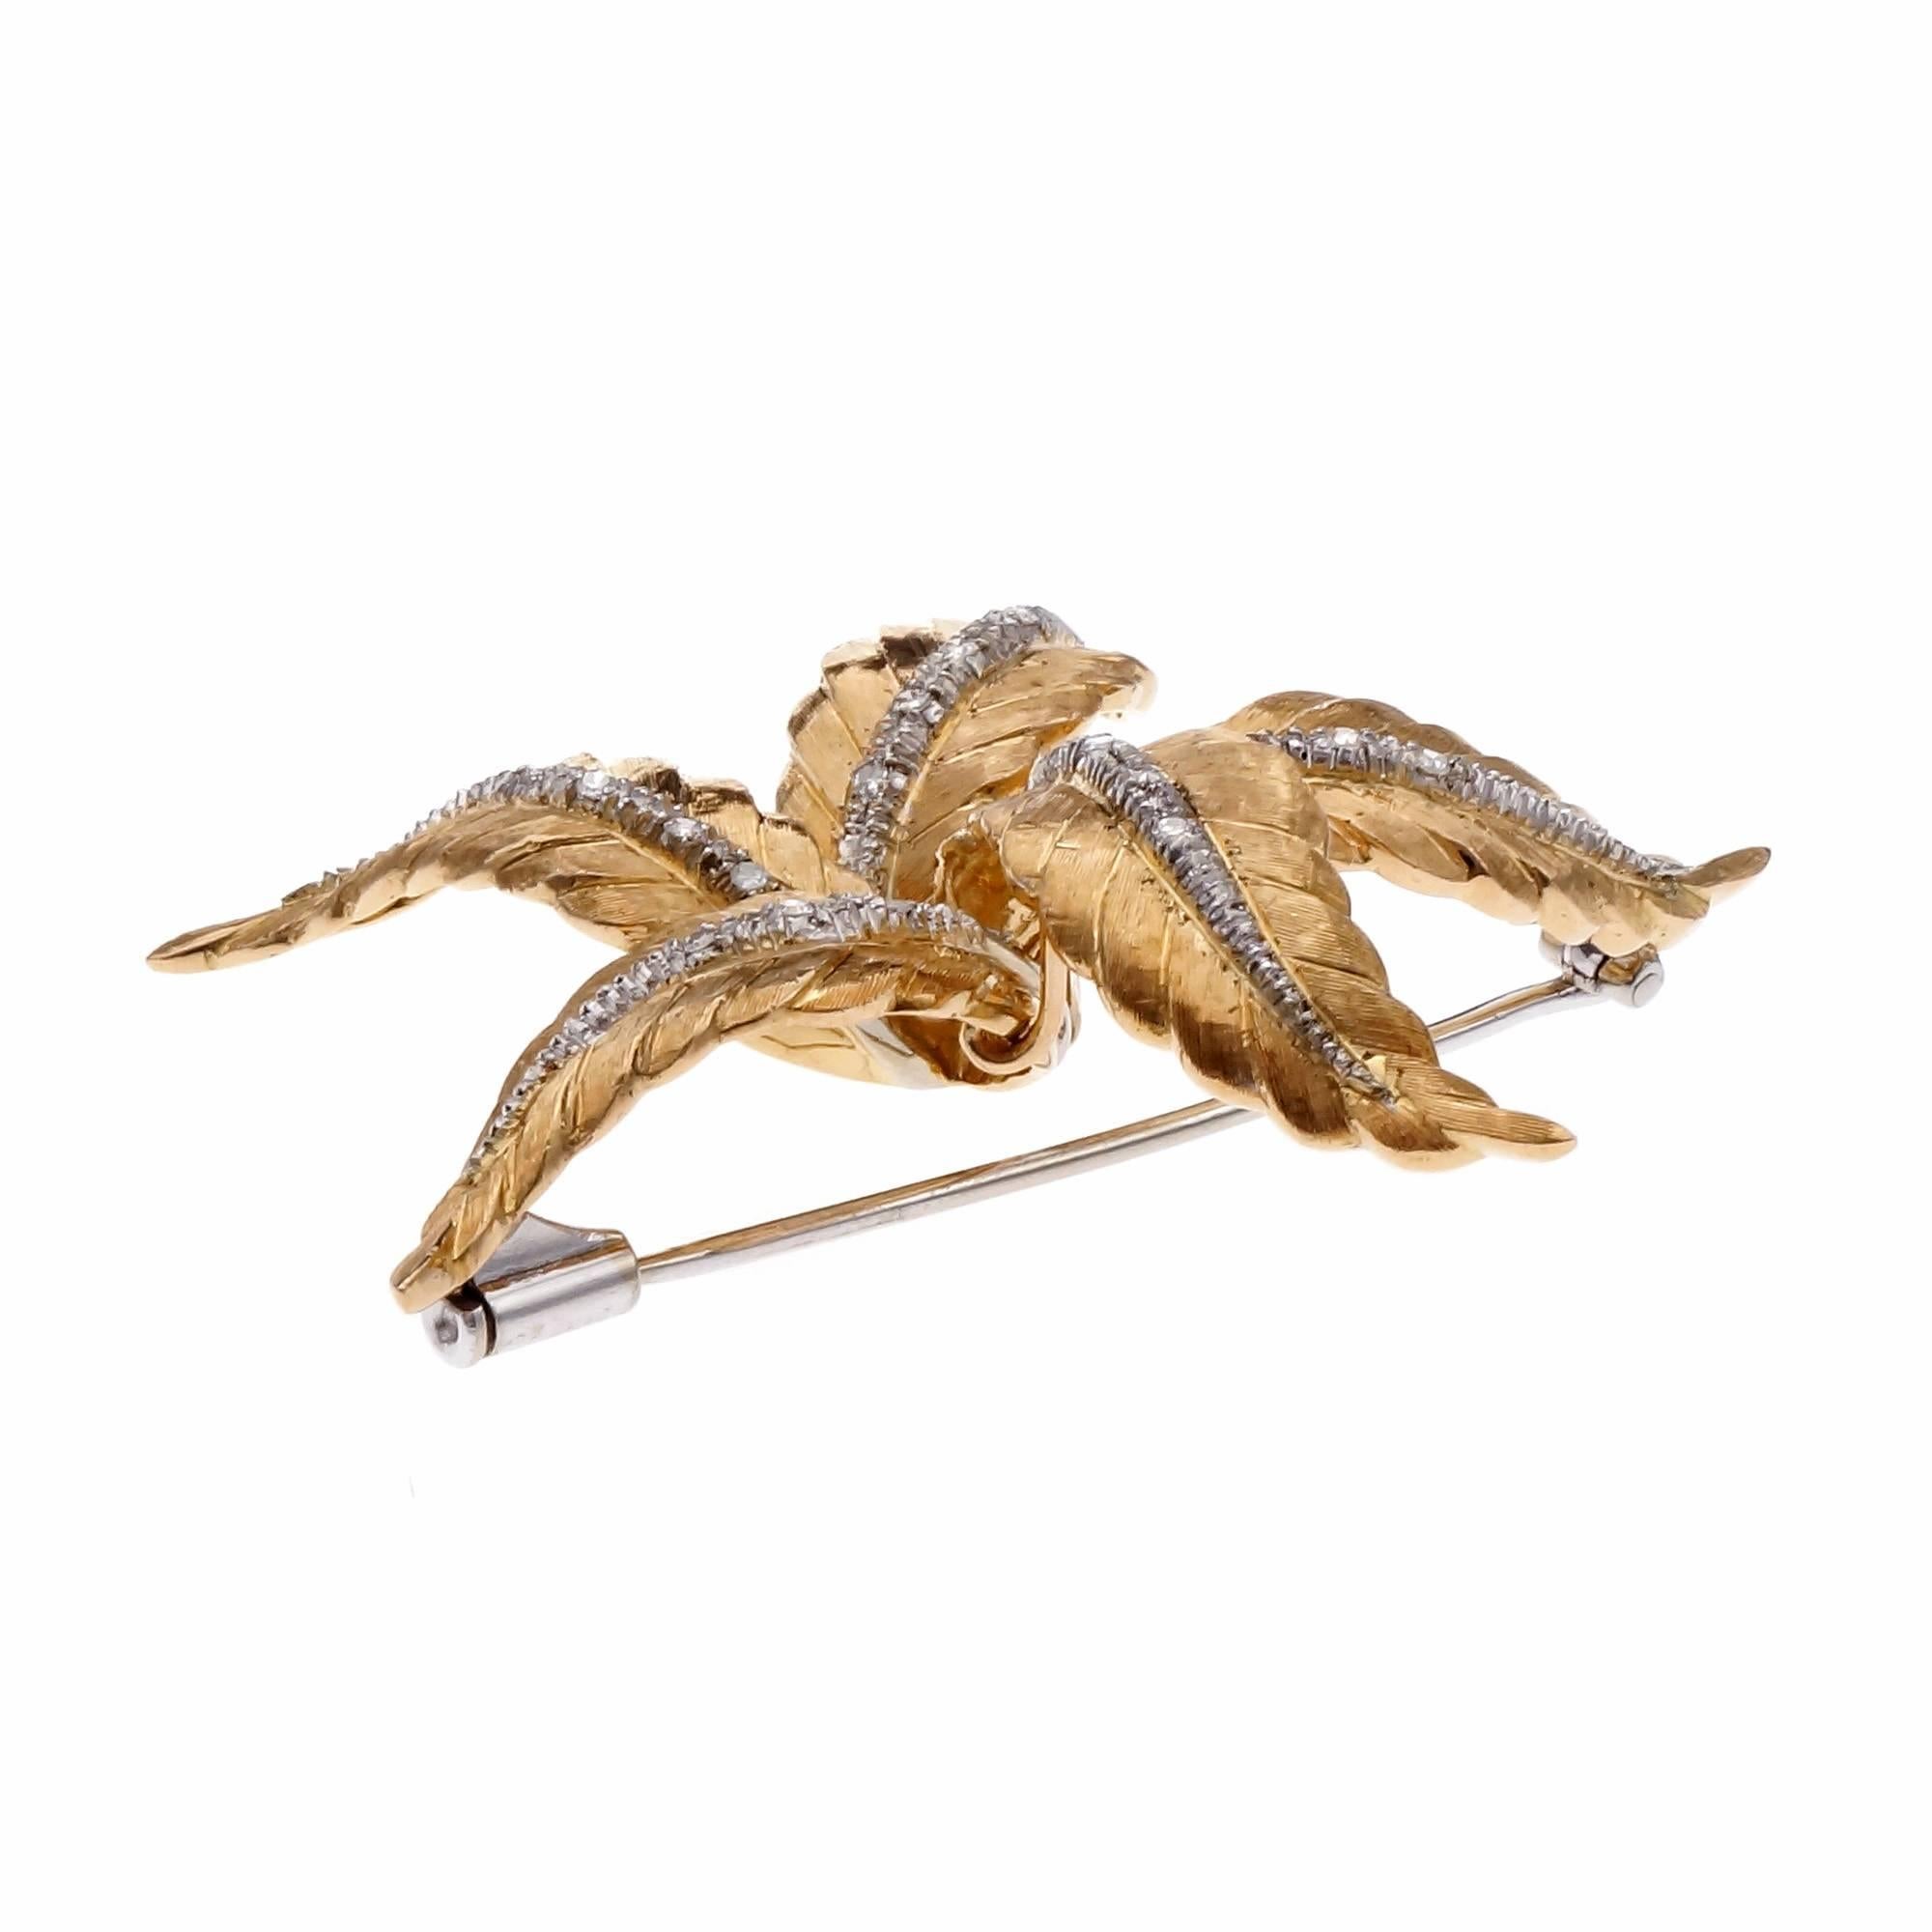 Vintage 1960's Mid-Century textured gold Spitzer & Furman star brooch. A piece that effortlessly combines elegance and charm. Each 18k yellow gold textured leaf is adorned with a strip 18k white gold featuring round sparkling diamonds. Expertly